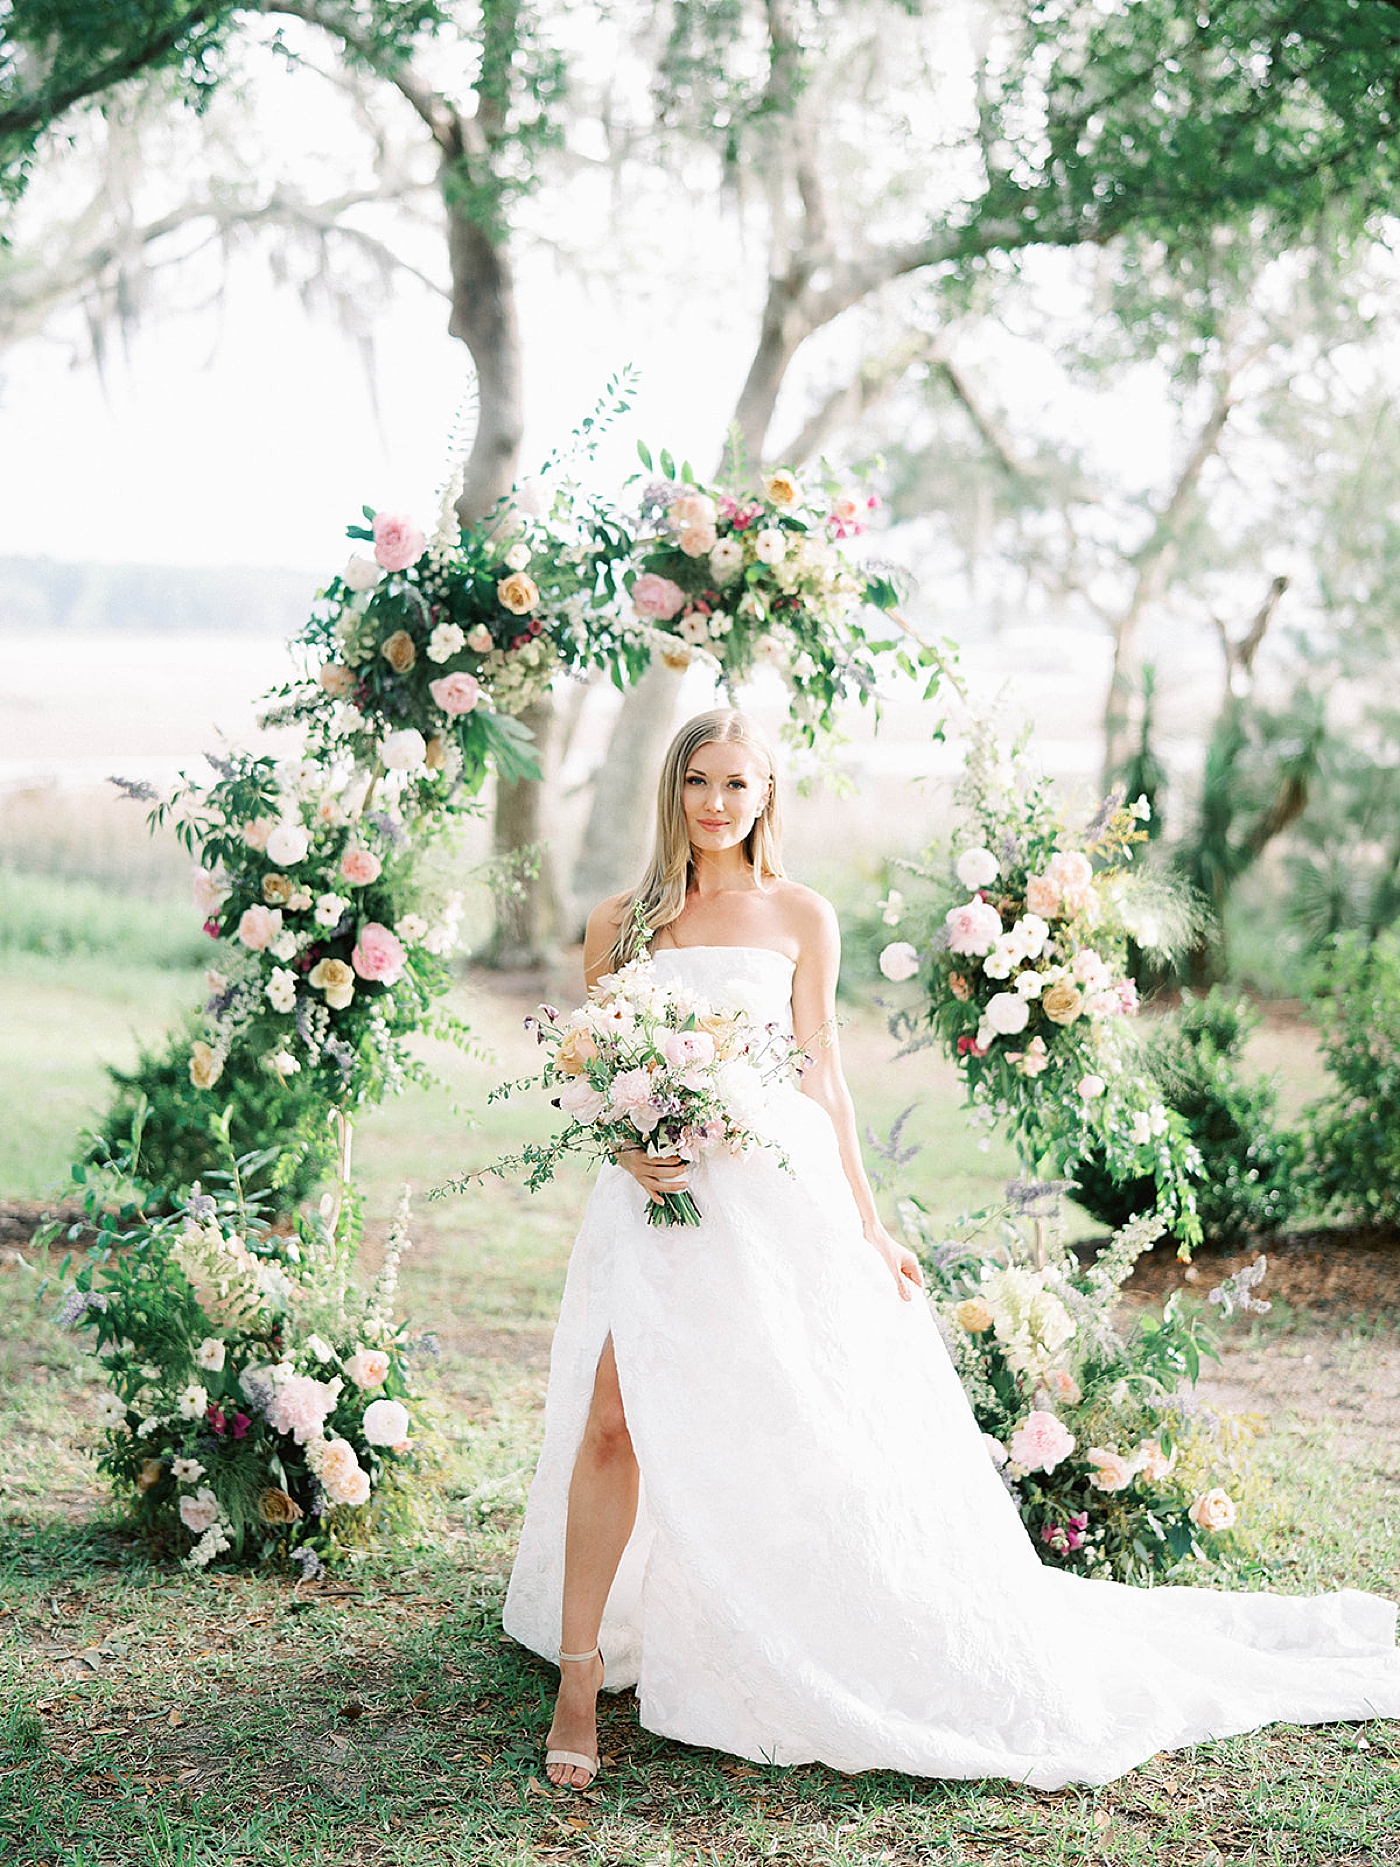 Bride smiling in front of floral arbor | Carters Event Co